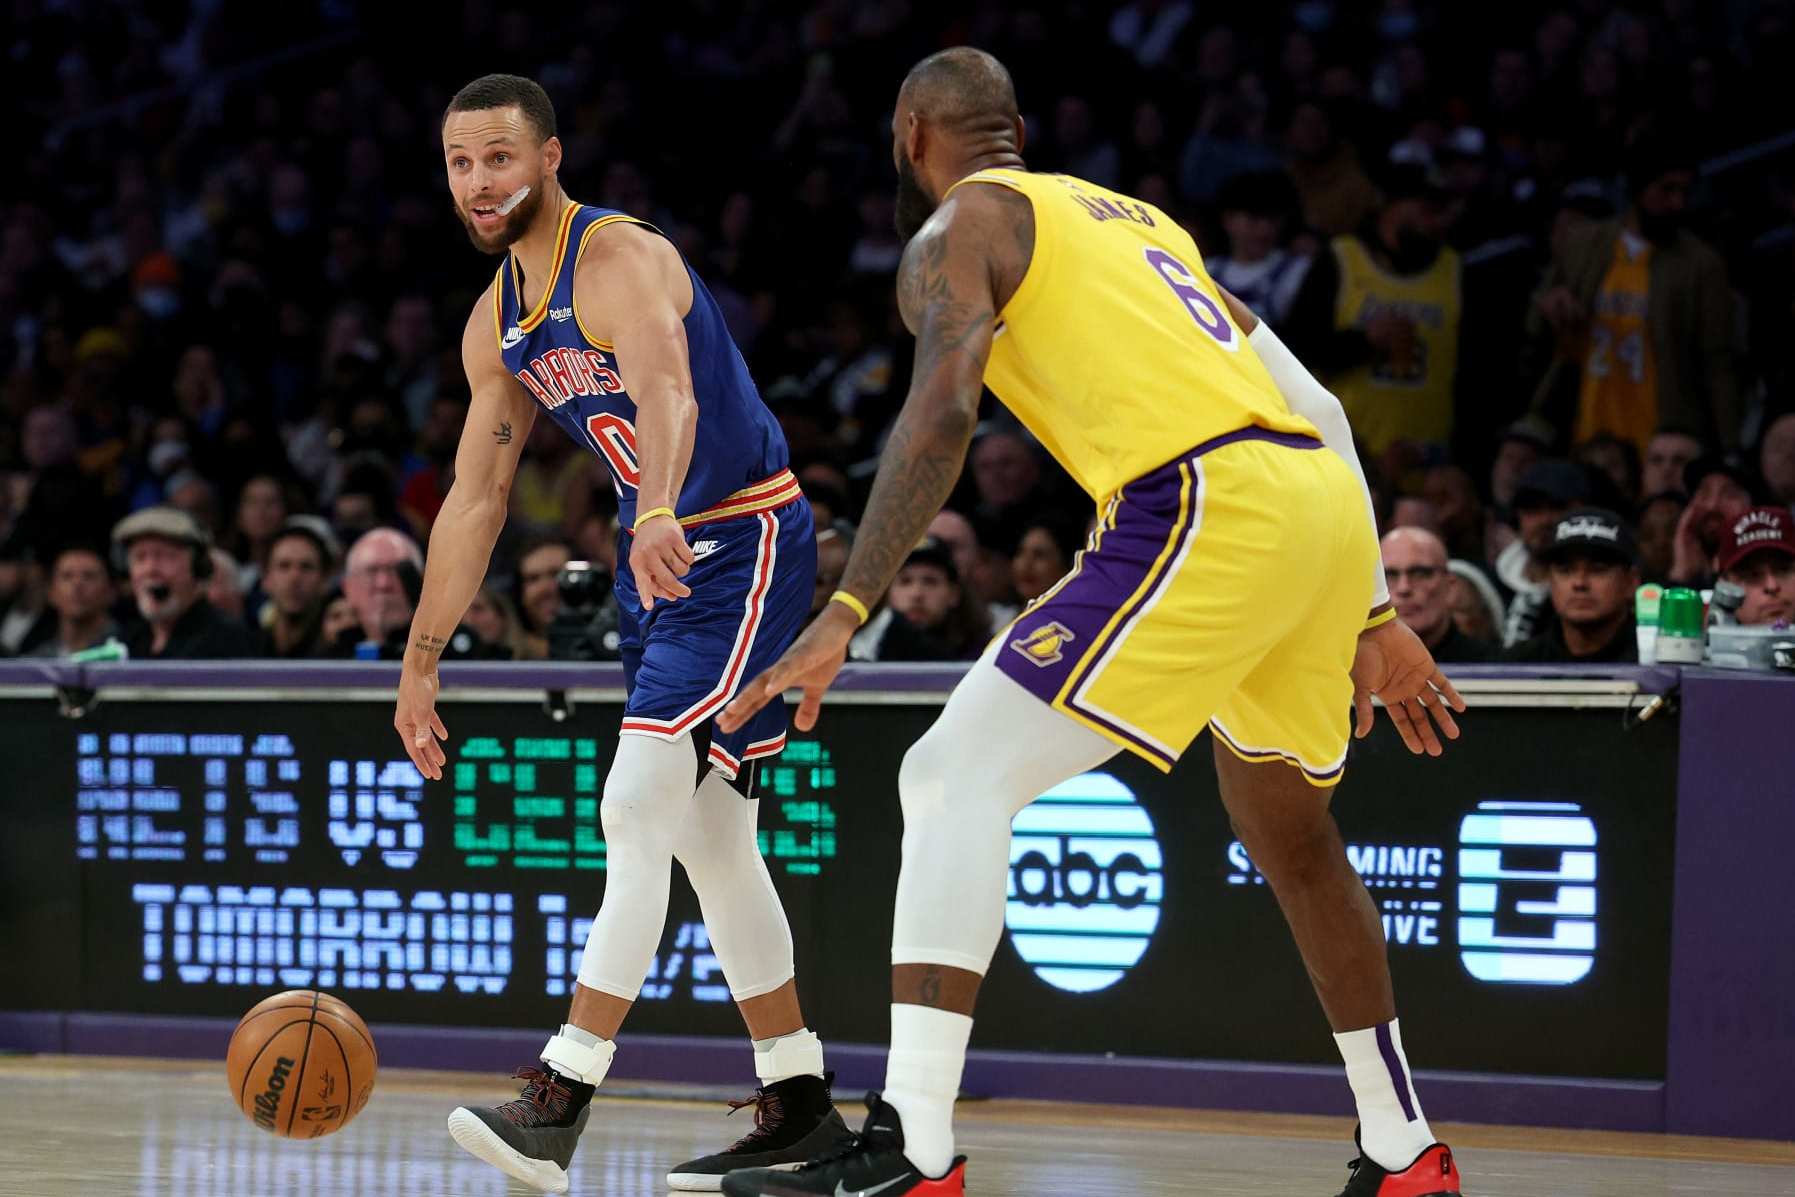 TNT to Tip Off 2022-23 NBA Season with Exclusive Opening Night Doubleheader  Featuring Stephen Curry & Defending NBA Champion Warriors Hosting LeBron  James & Los Angeles Lakers